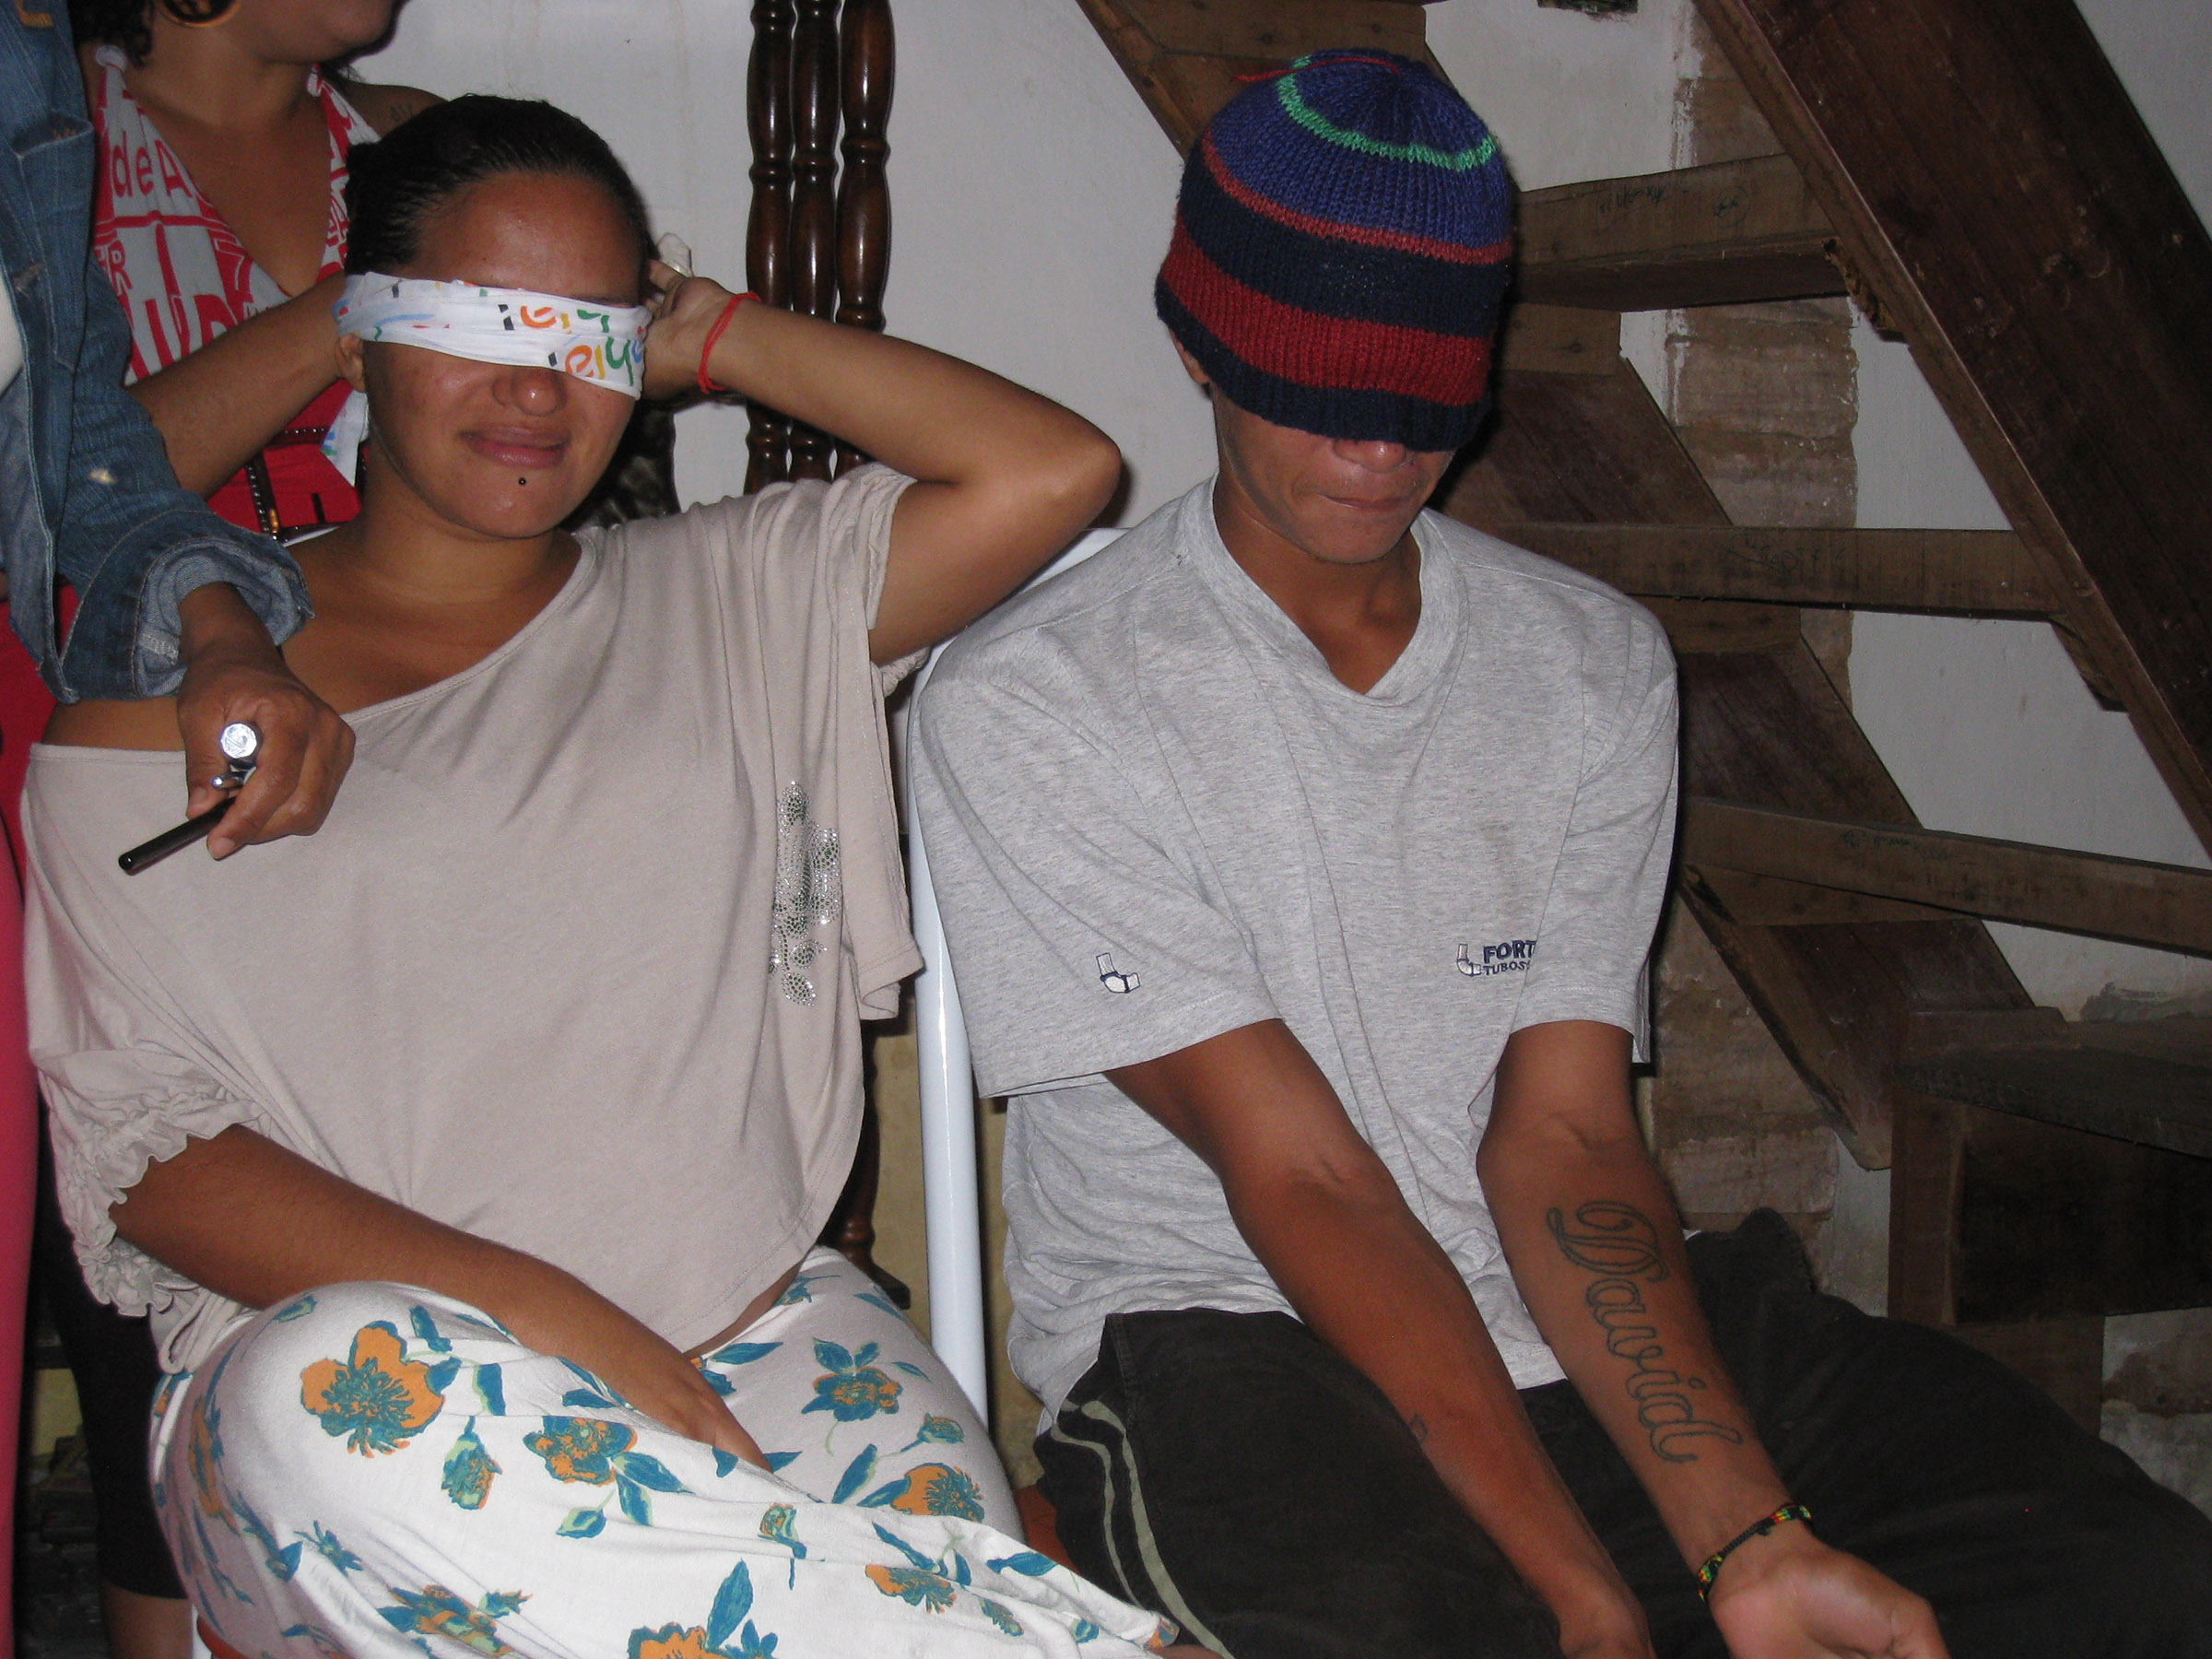 A young man and woman sit next to each other, the man with a hat over his eyes and the woman a blindfold.